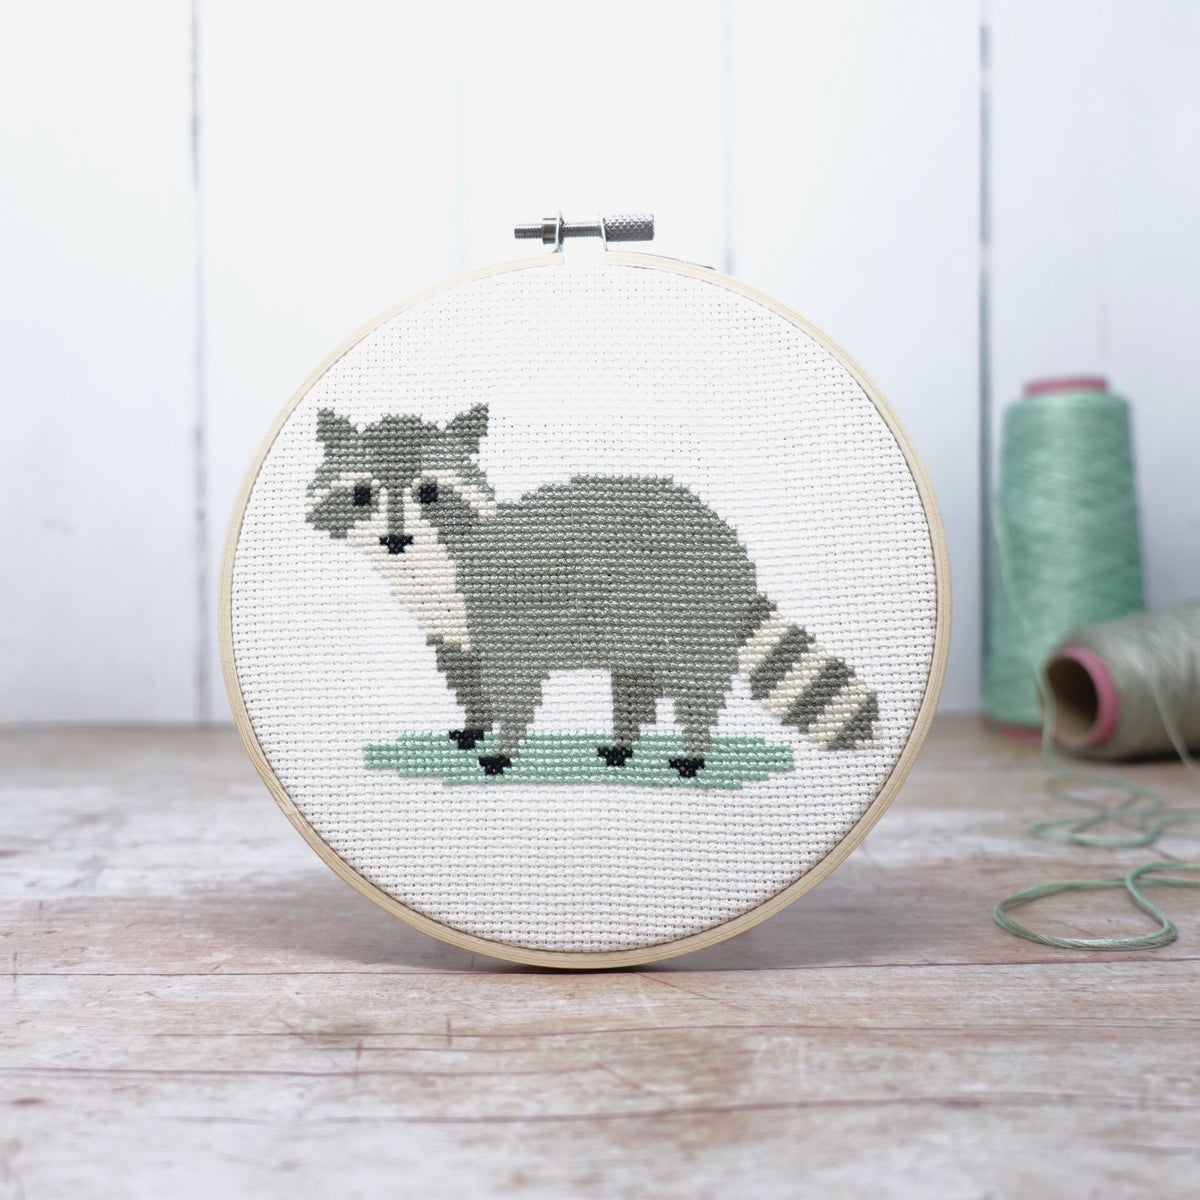 Why You Should Challenge Your Cross Stitch